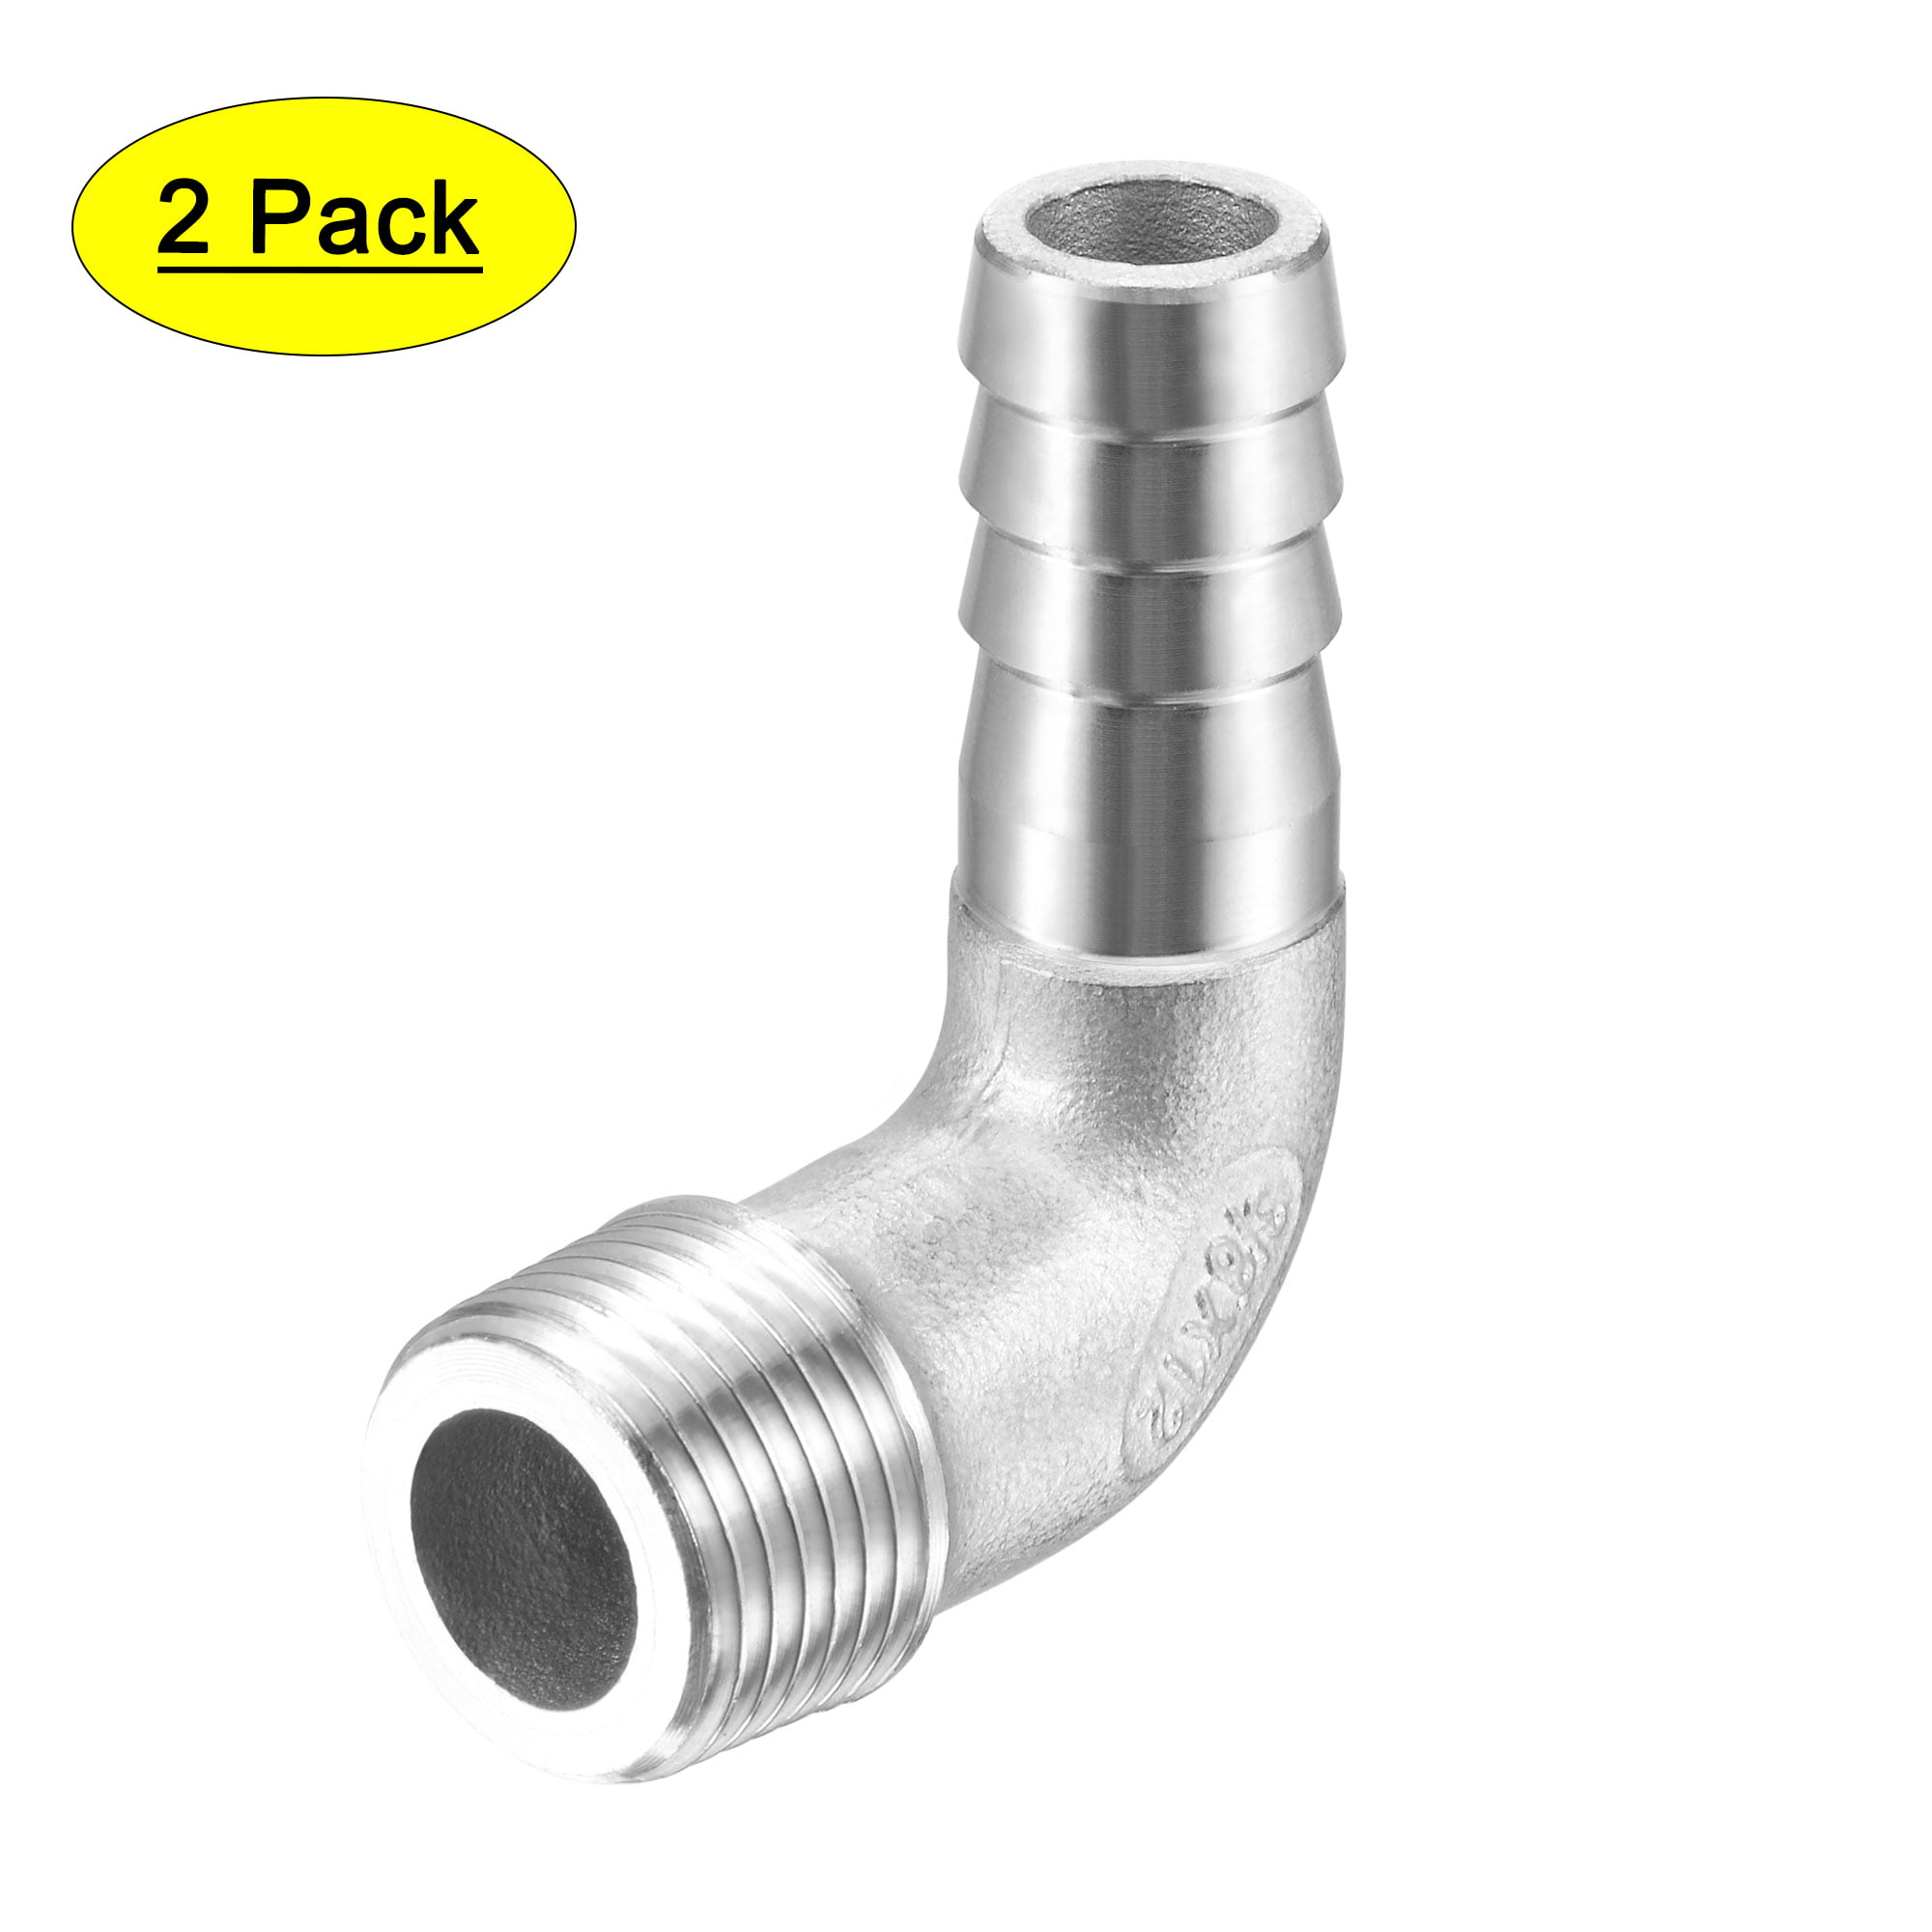 Stainless Steel Barbed Male Straight Hose Threaded Fitting Coupling Connector 